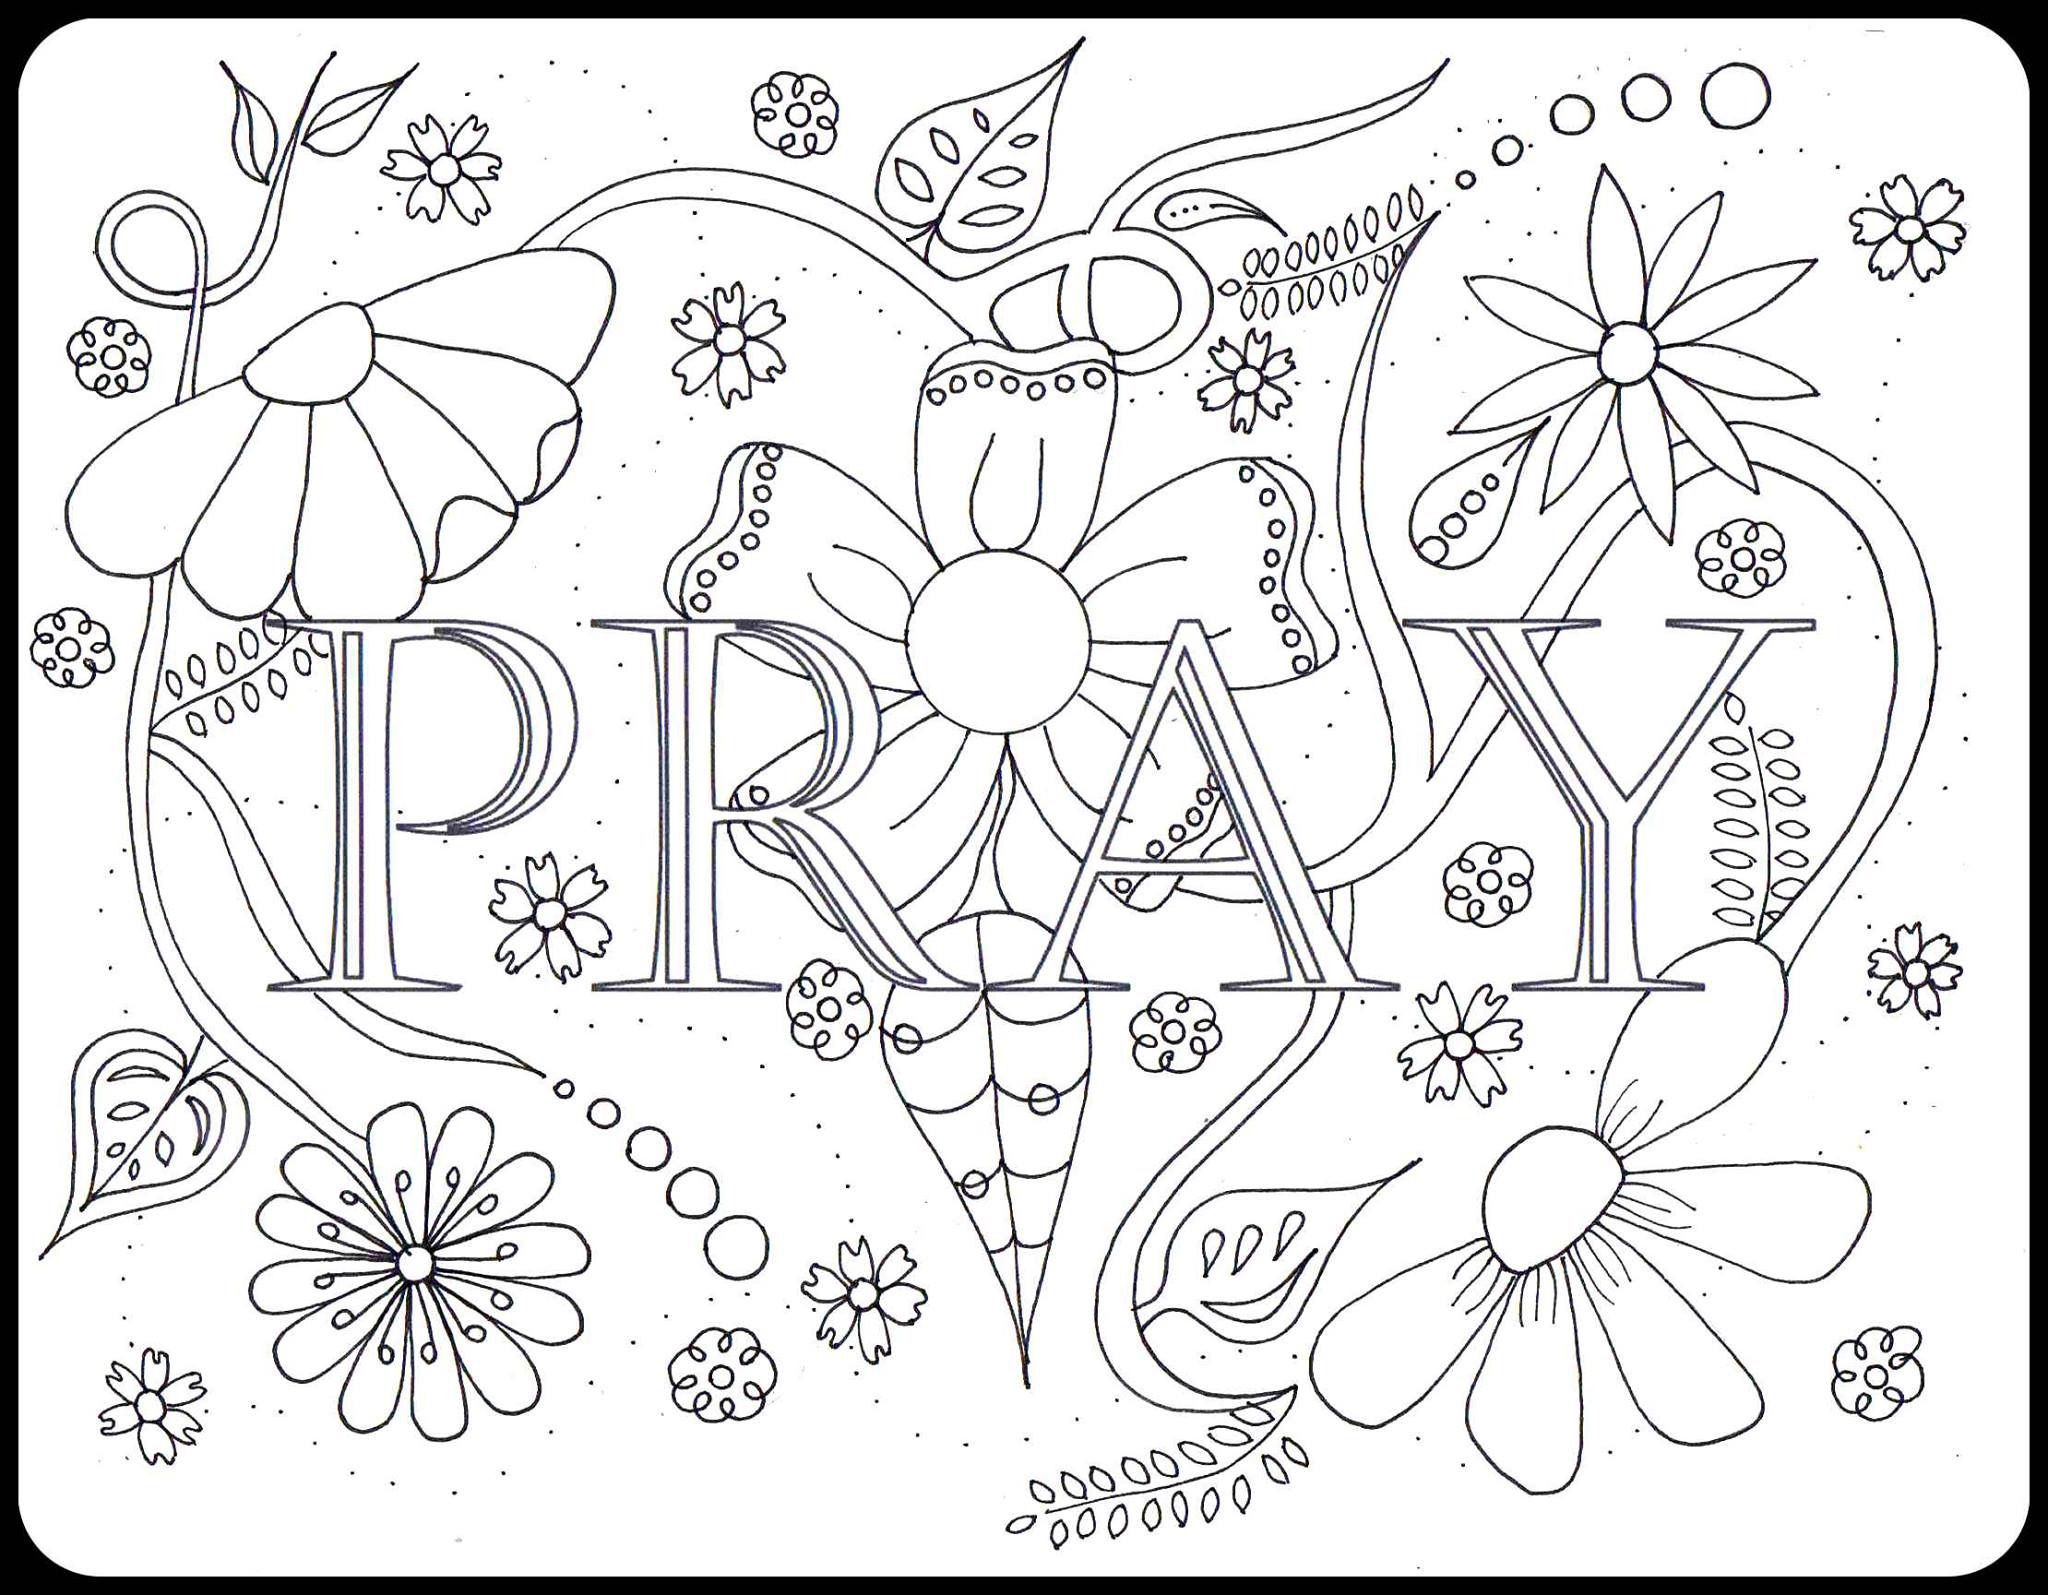 Lds Adult Coloring Pages
 Lds Coloring Pages With Best 20 Lds Ideas Pinterest